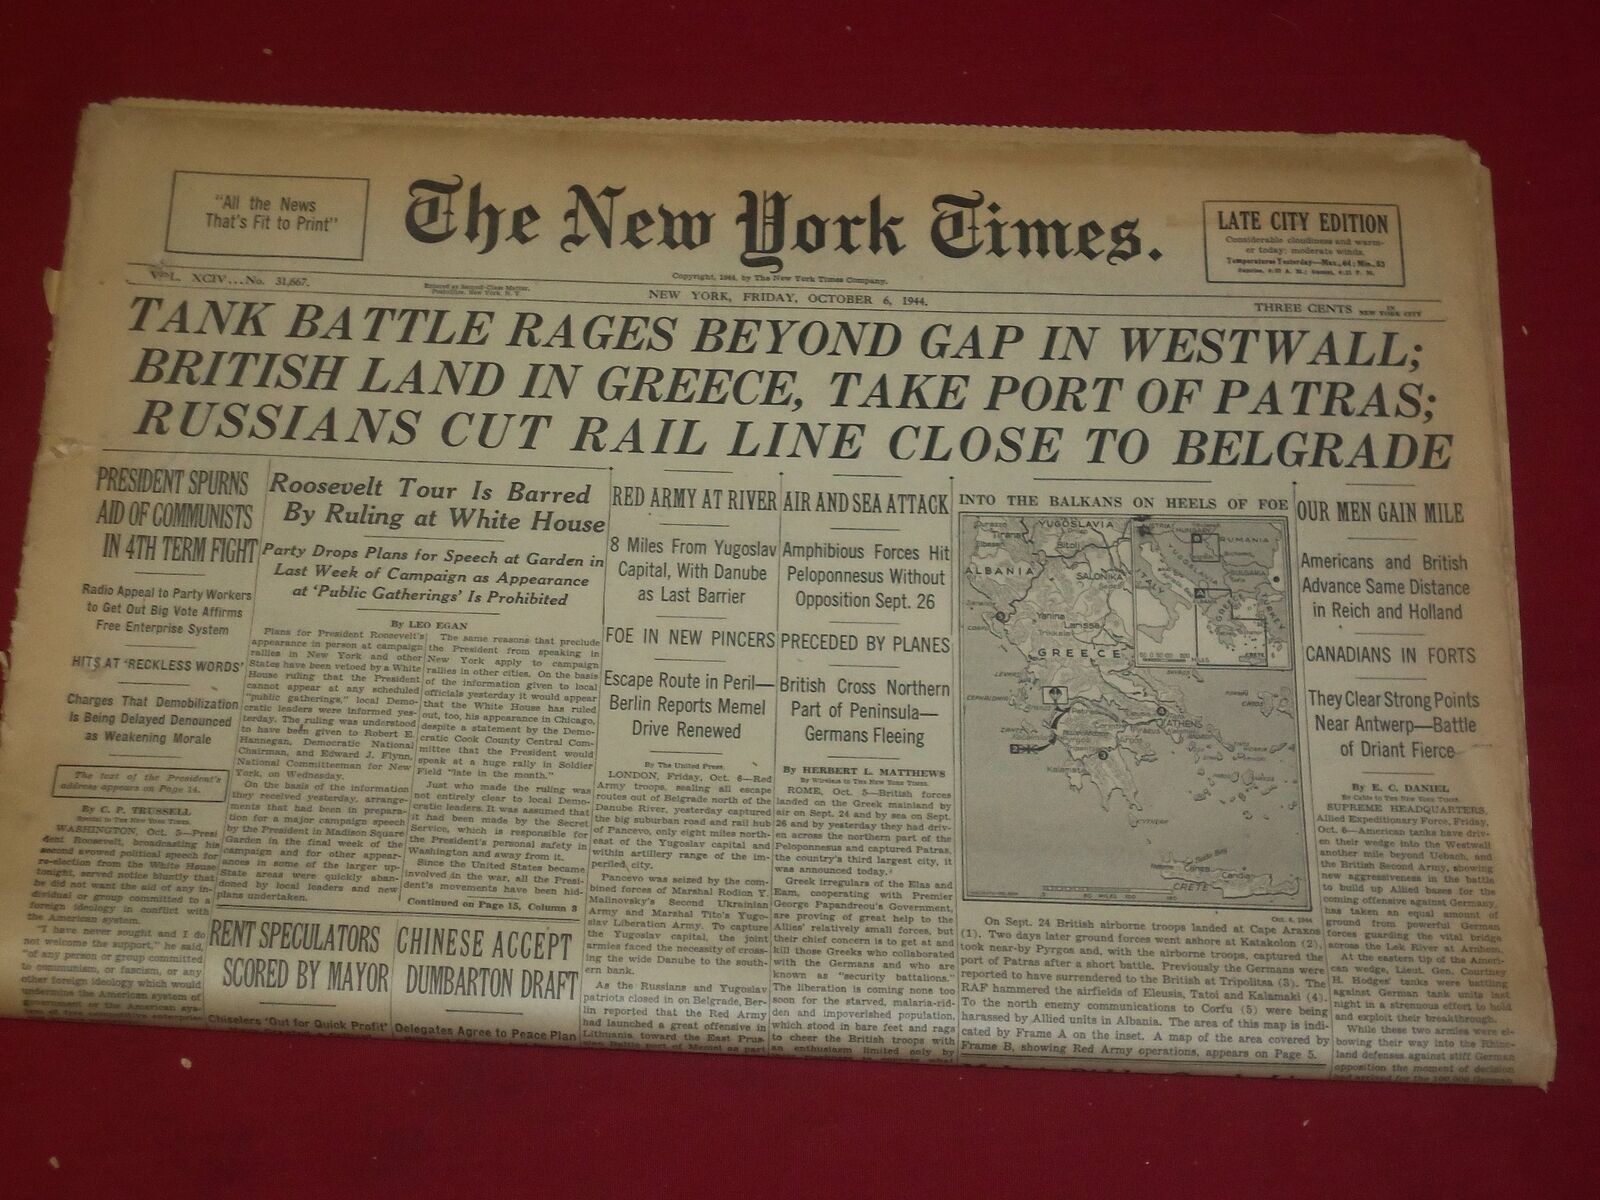 1944 OCTOBER 6 NEW YORK TIMES- TANK BATTLE RAGES BEYOND GAP IN WESTWALL- NP 3811